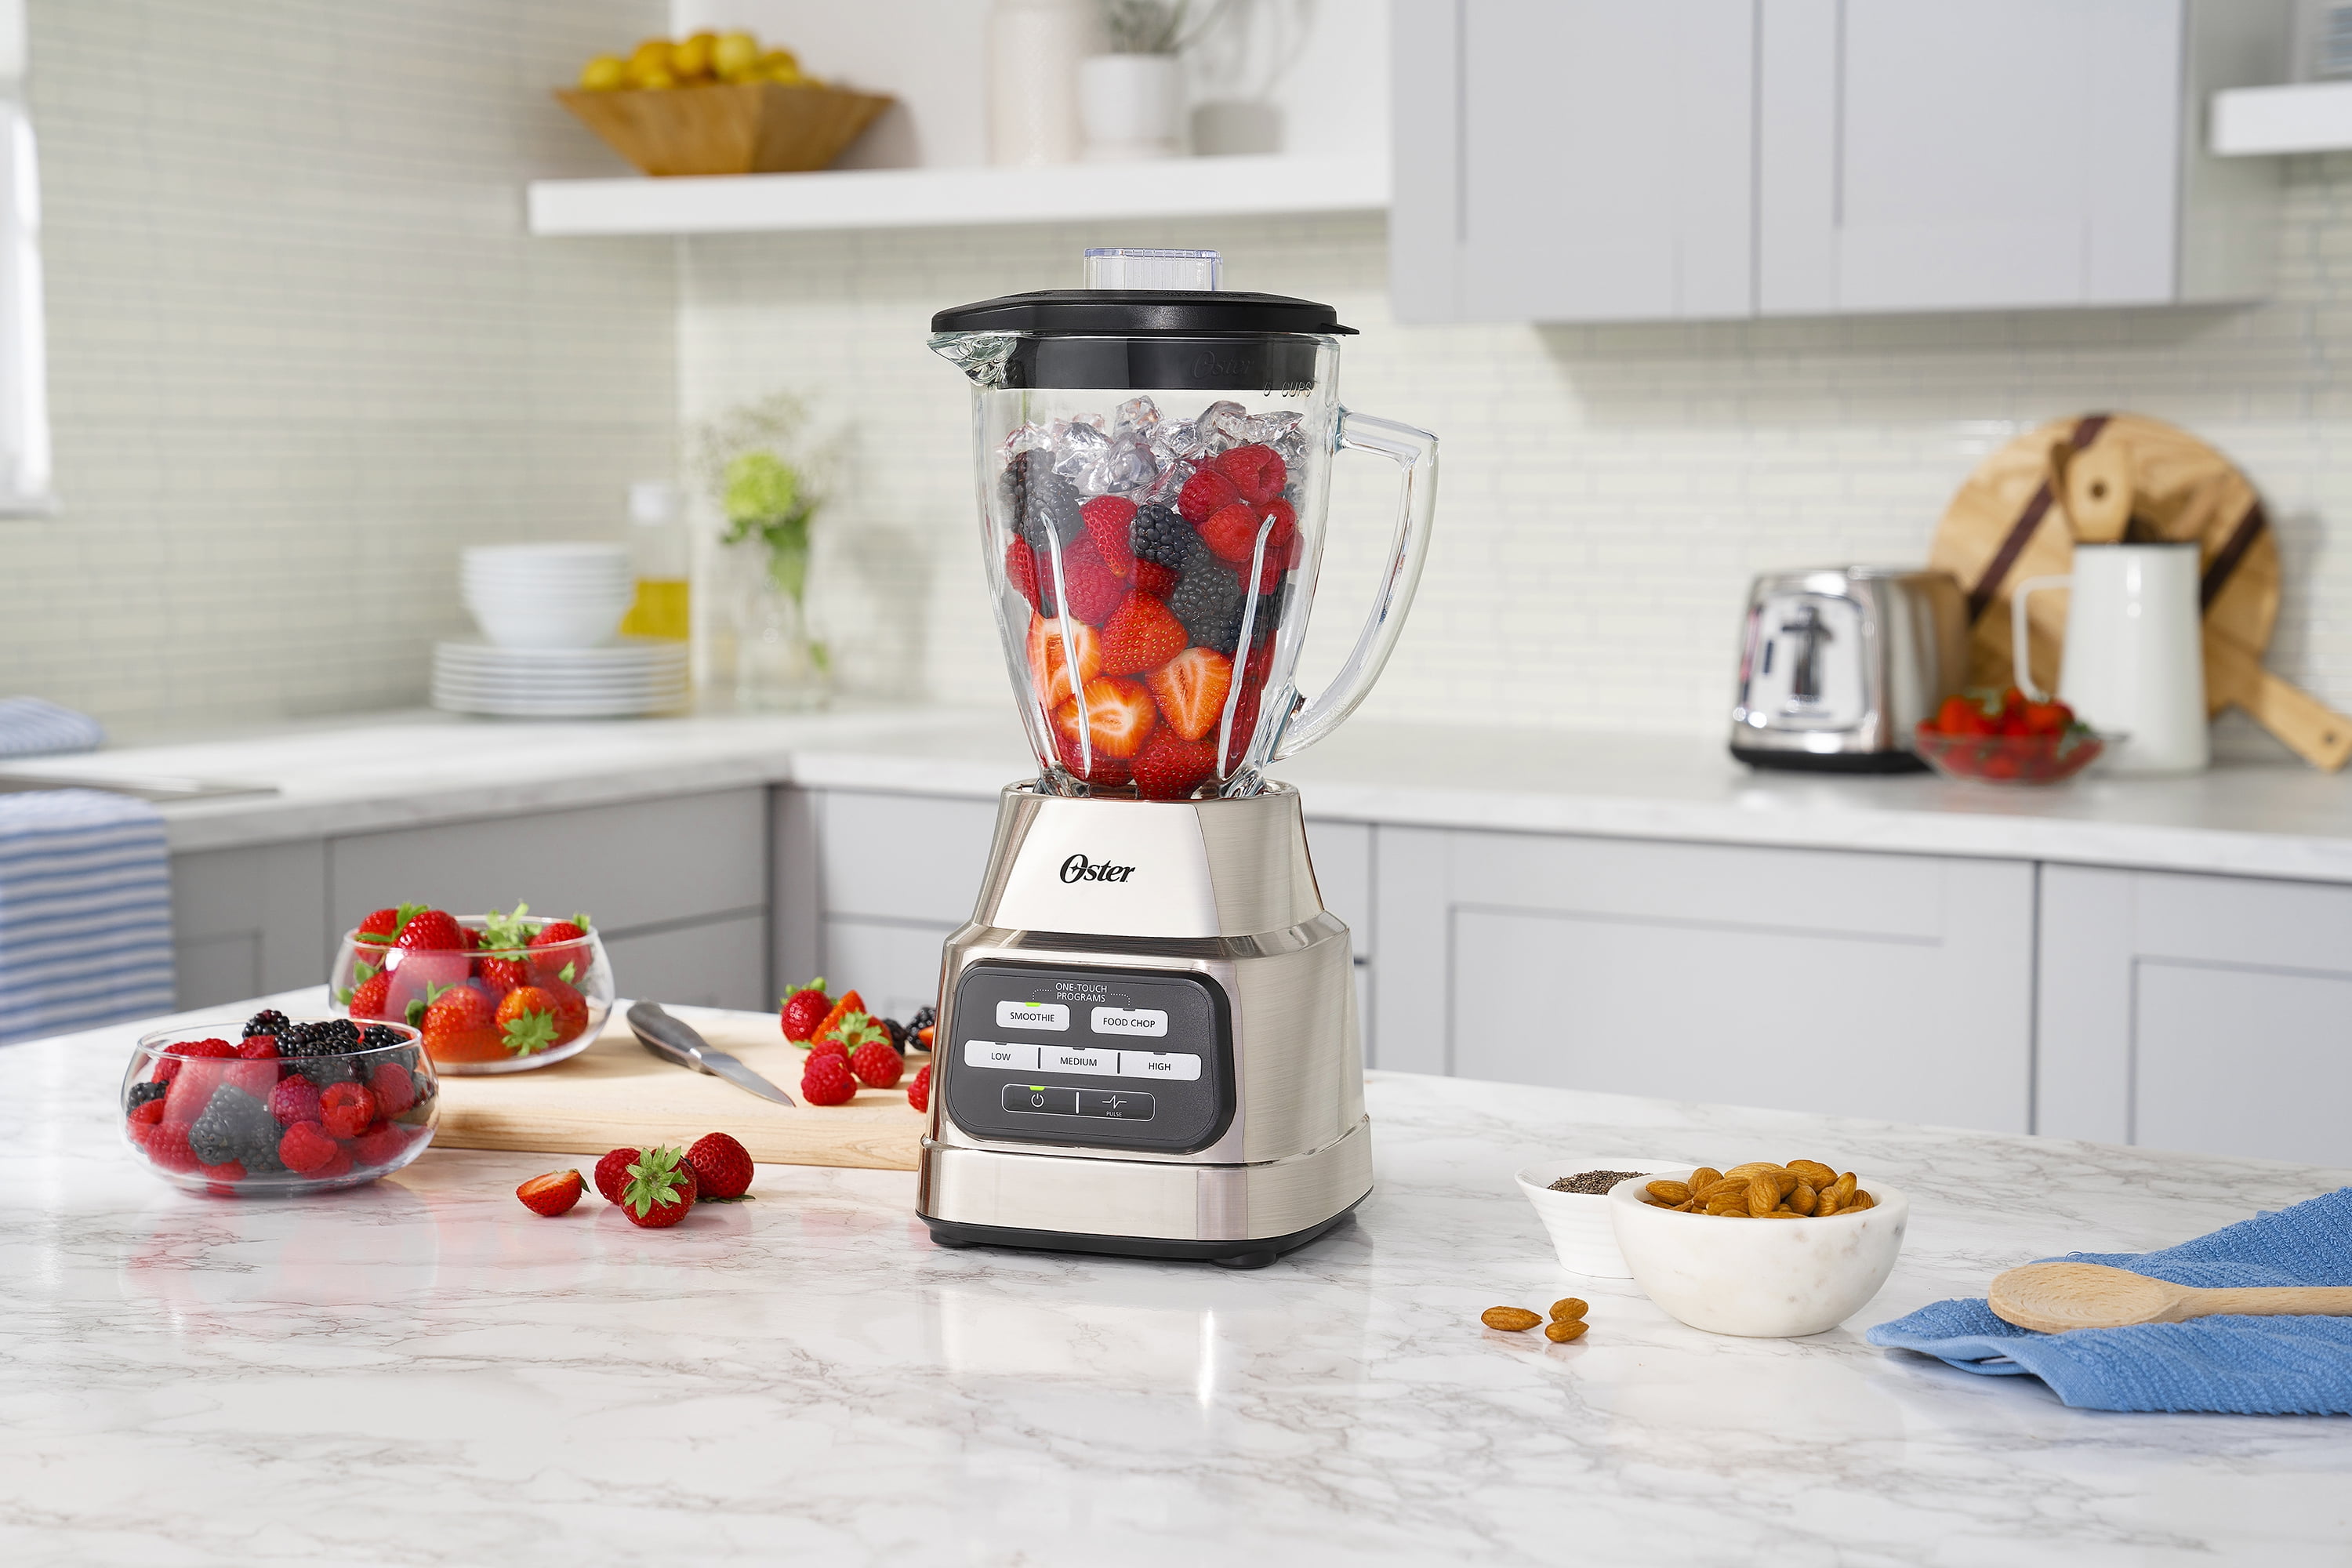 Oster One-Touch Blender with Auto-Programs and 6-Cup Boroclass Glass Jar - 3